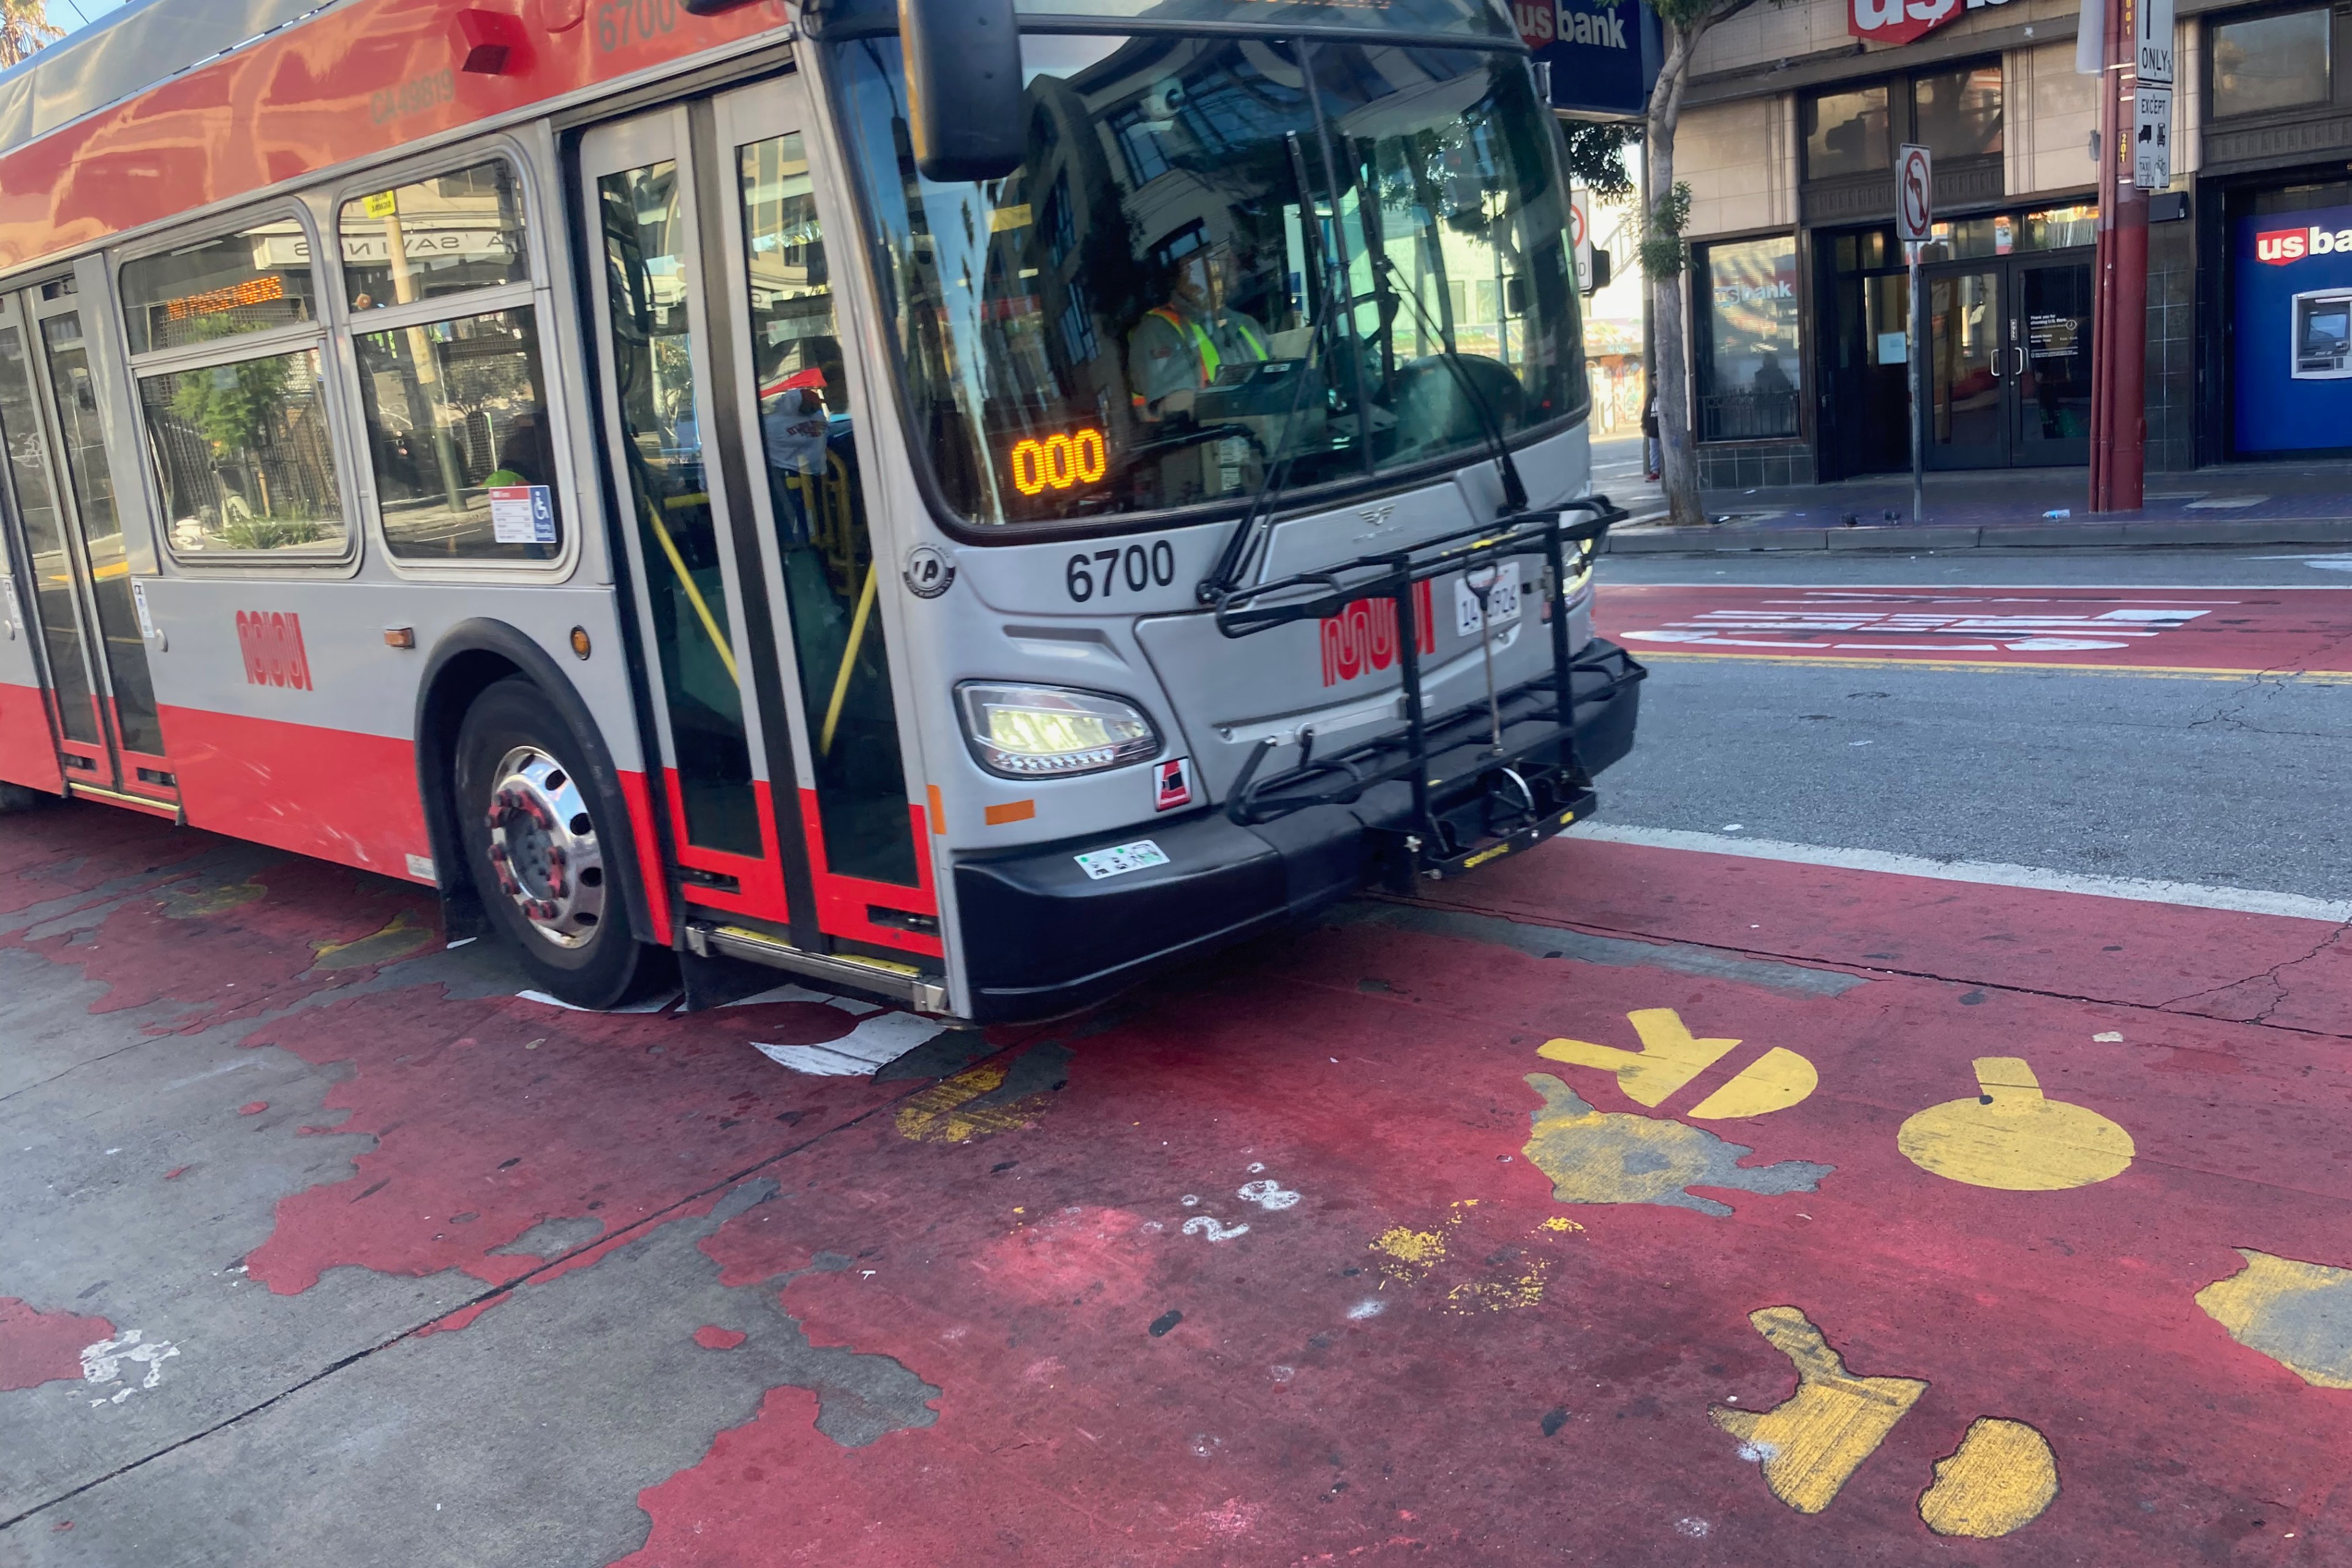 A red and white city bus is turning at an intersection with painted yellow footsteps on the pavement.